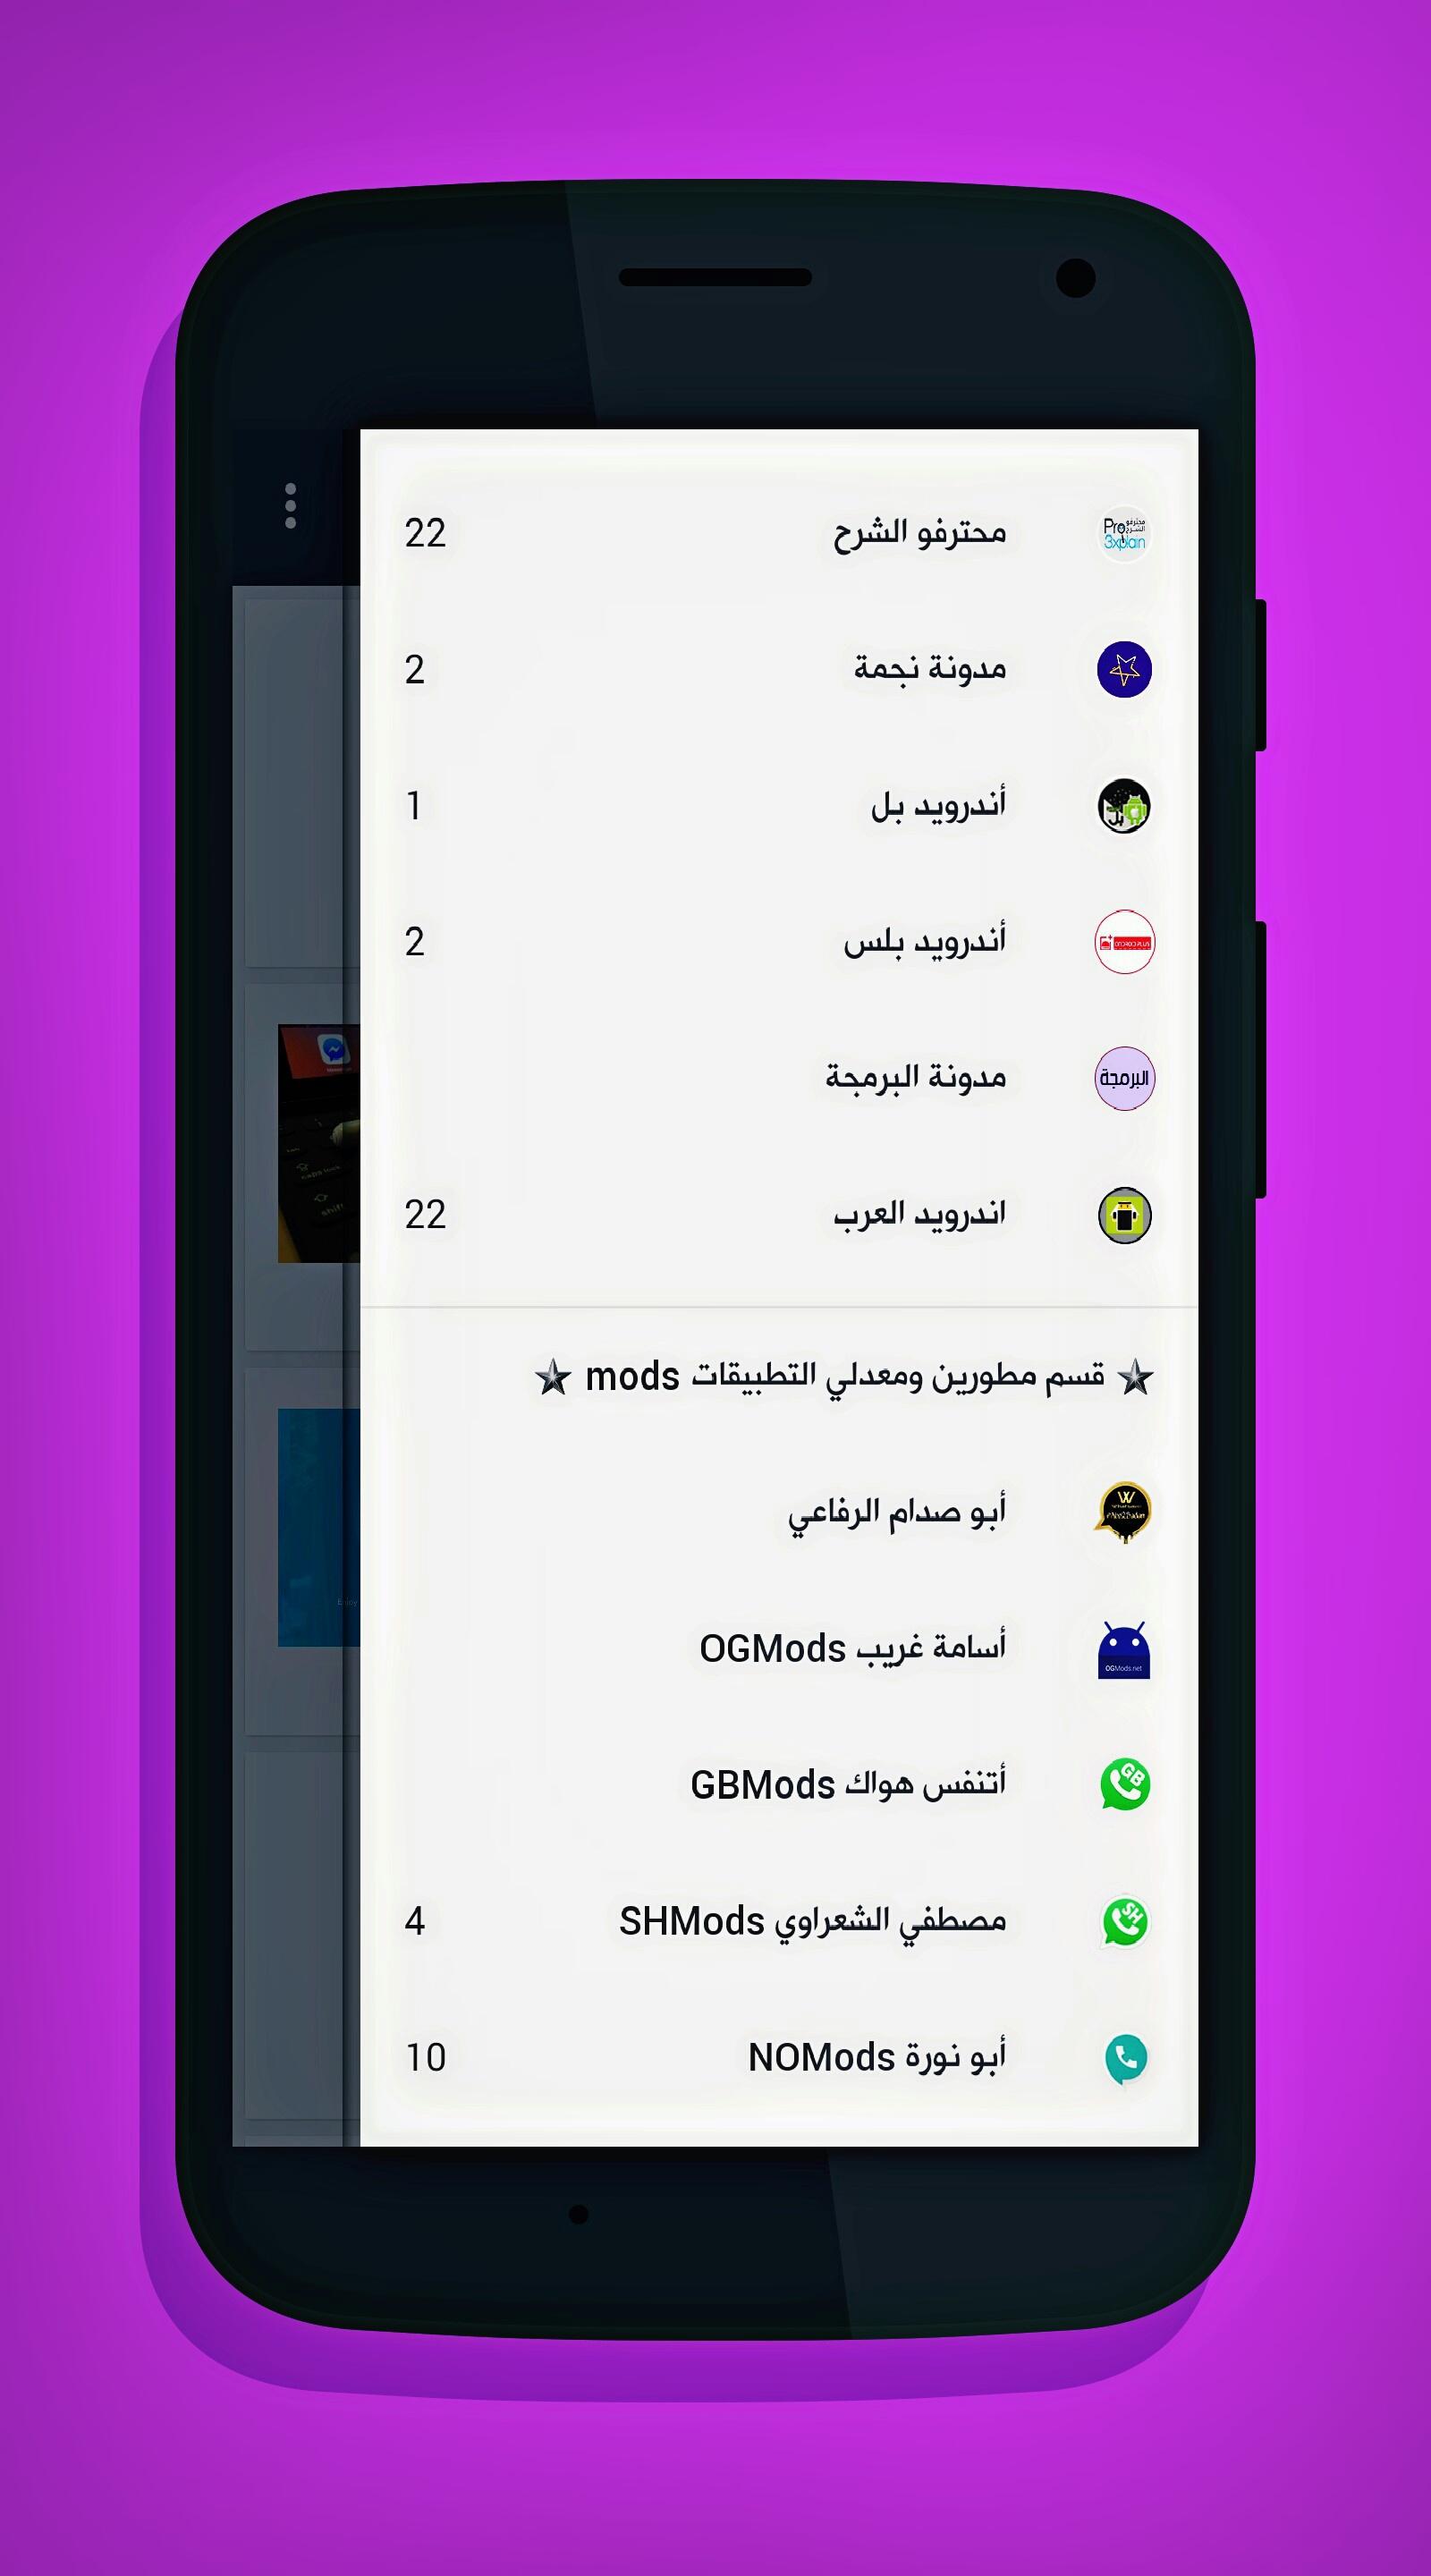 Ø§Ù„Ù…ÙˆØ³ÙˆØ¹Ø© Ø§Ù„ØªÙ‚Ù†ÙŠØ© for Android - APK Download - 